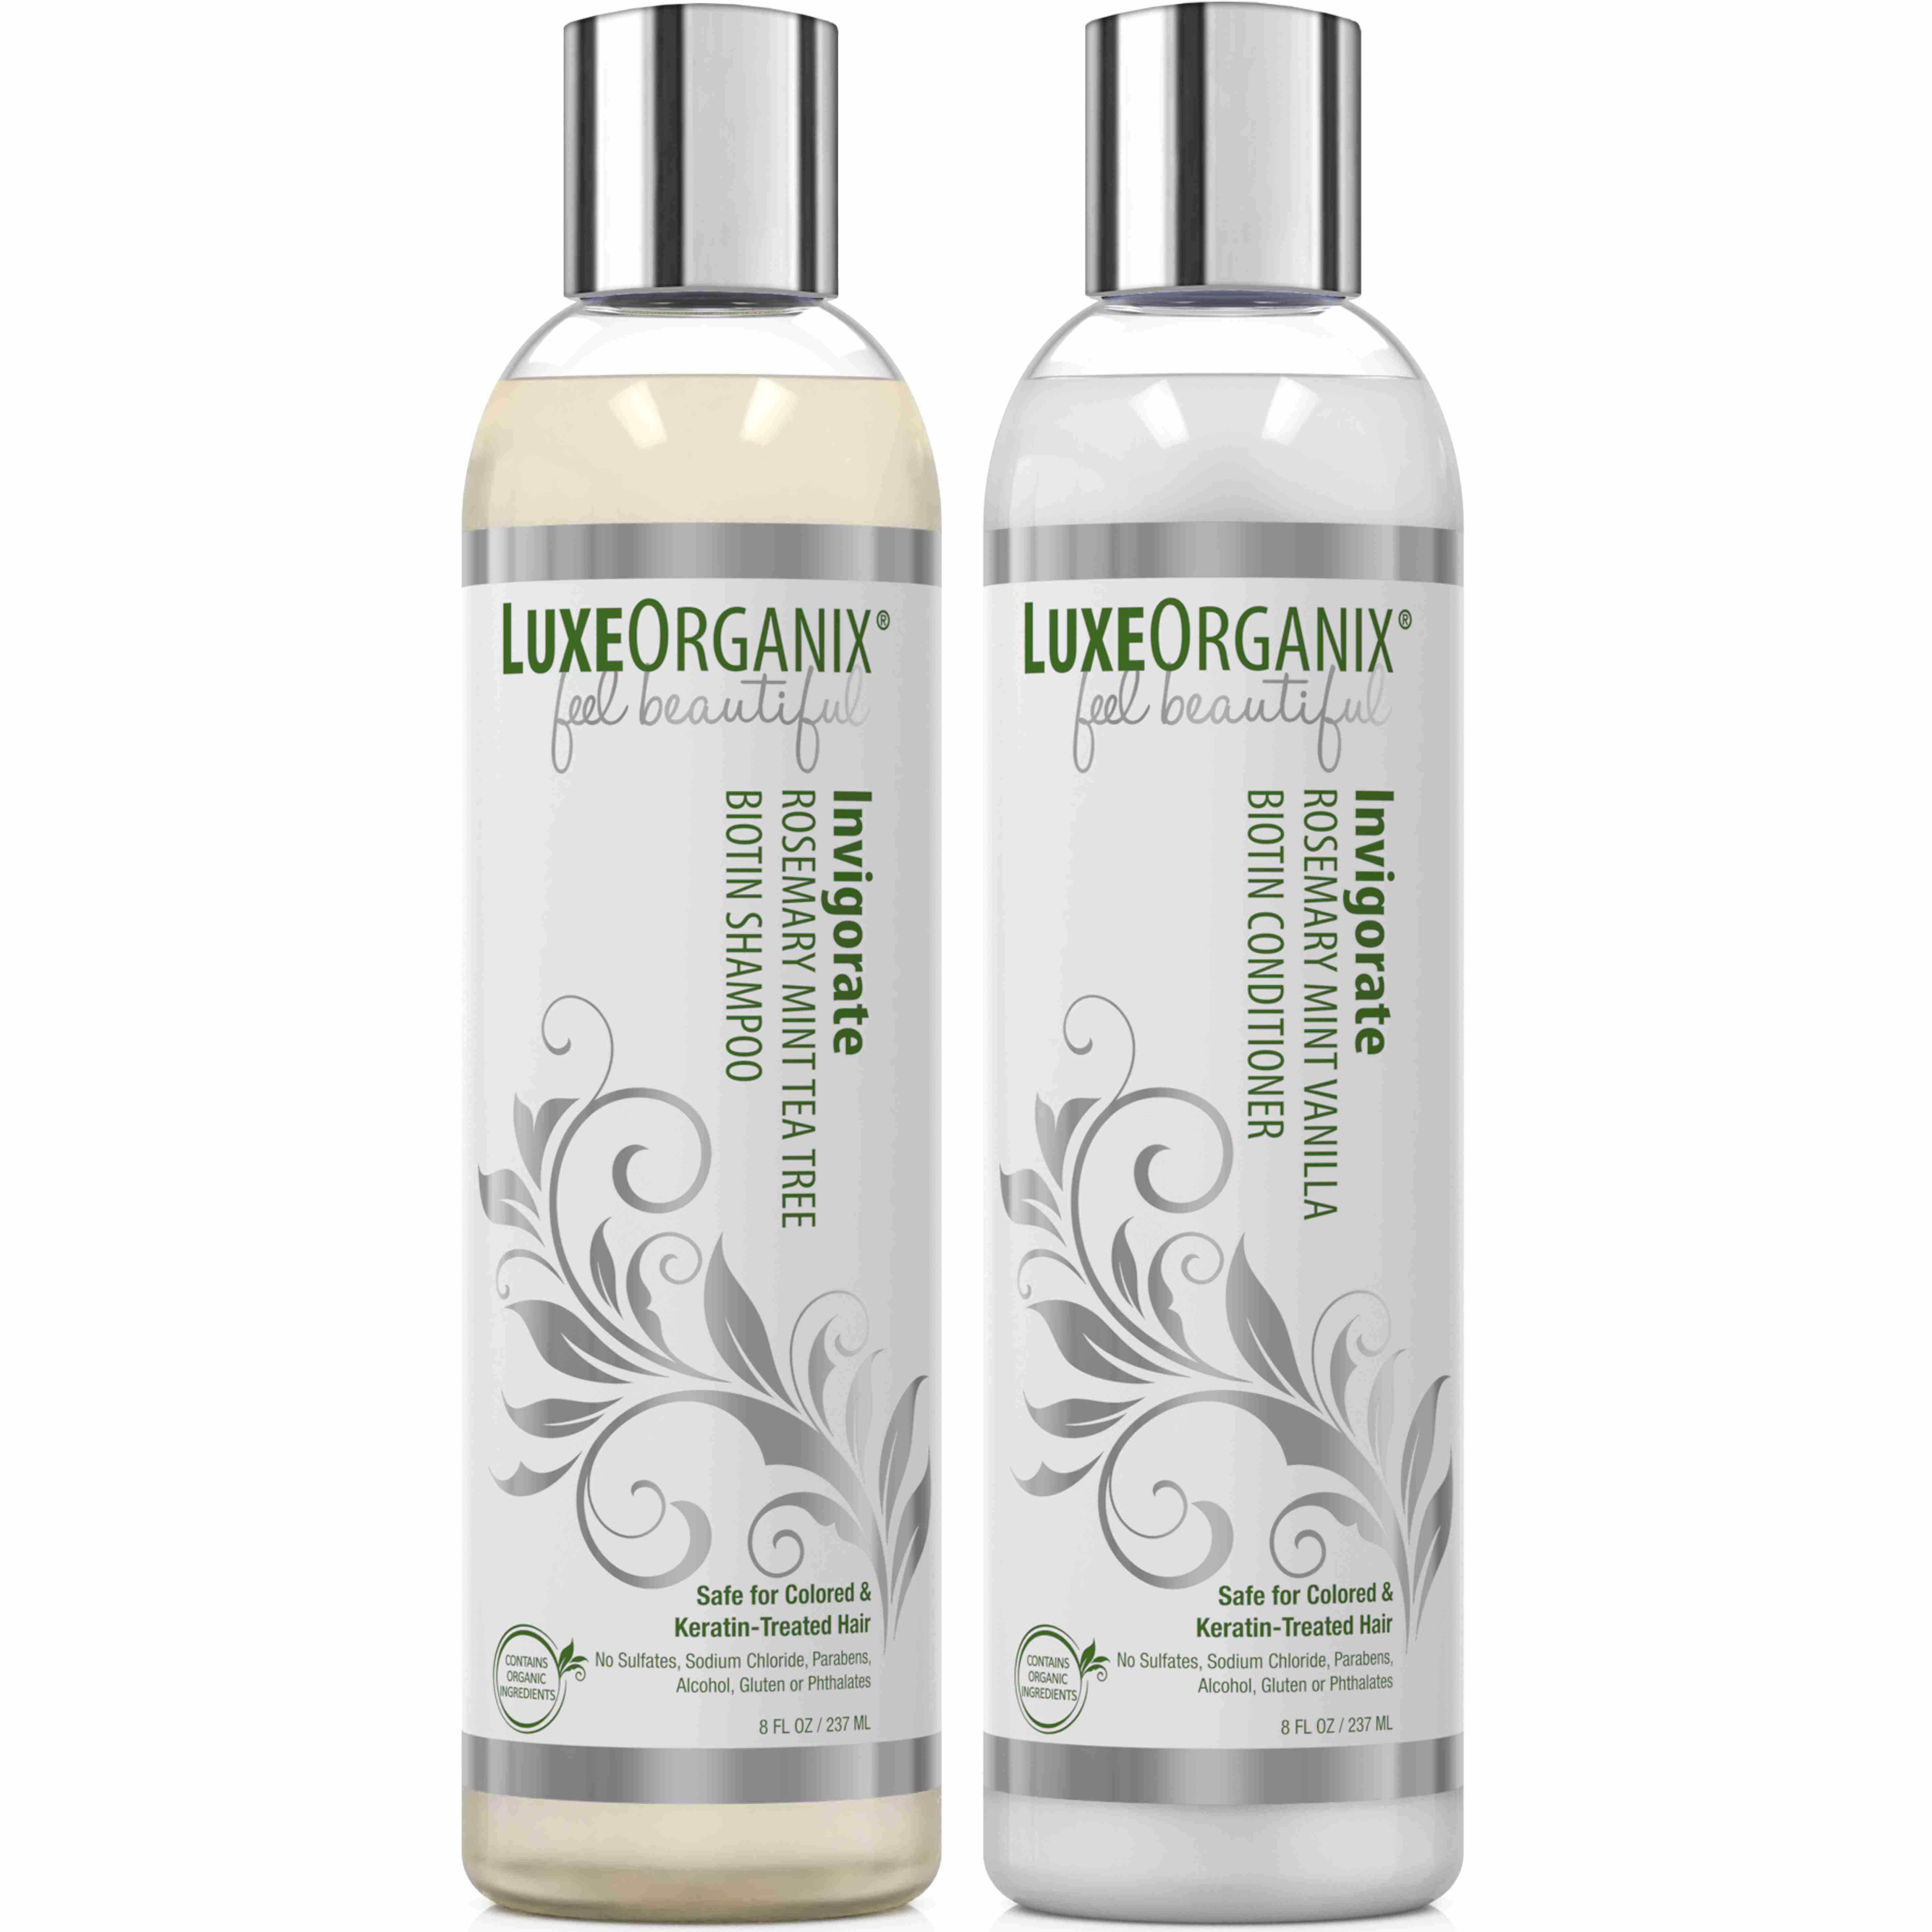 tea-tree-shampoo-and-conditioner-set with cash back rebate